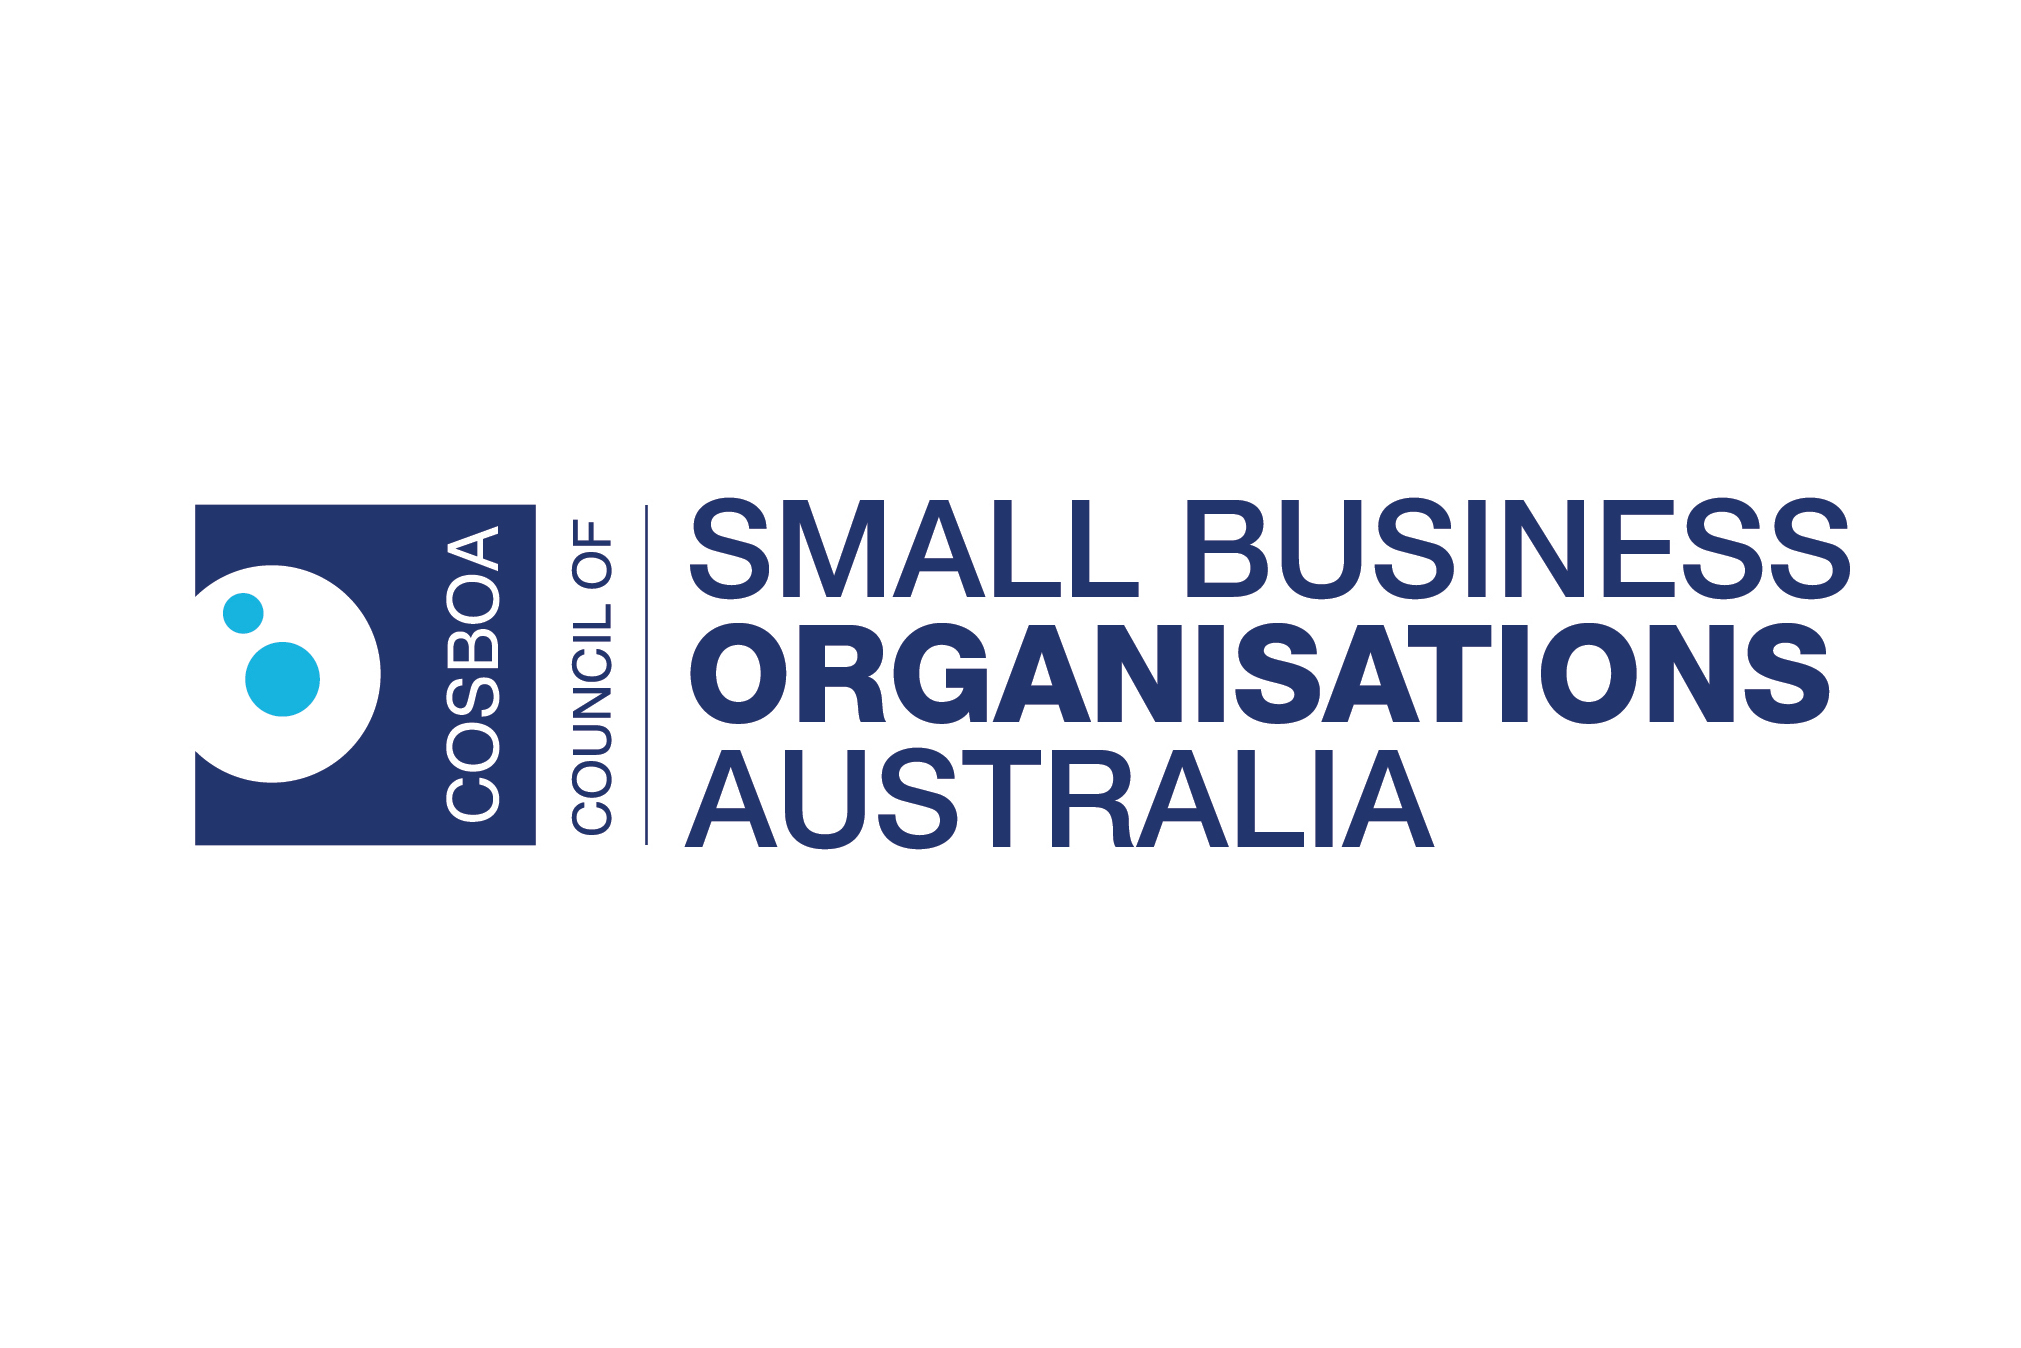 Council of Small Business Organisations Australia